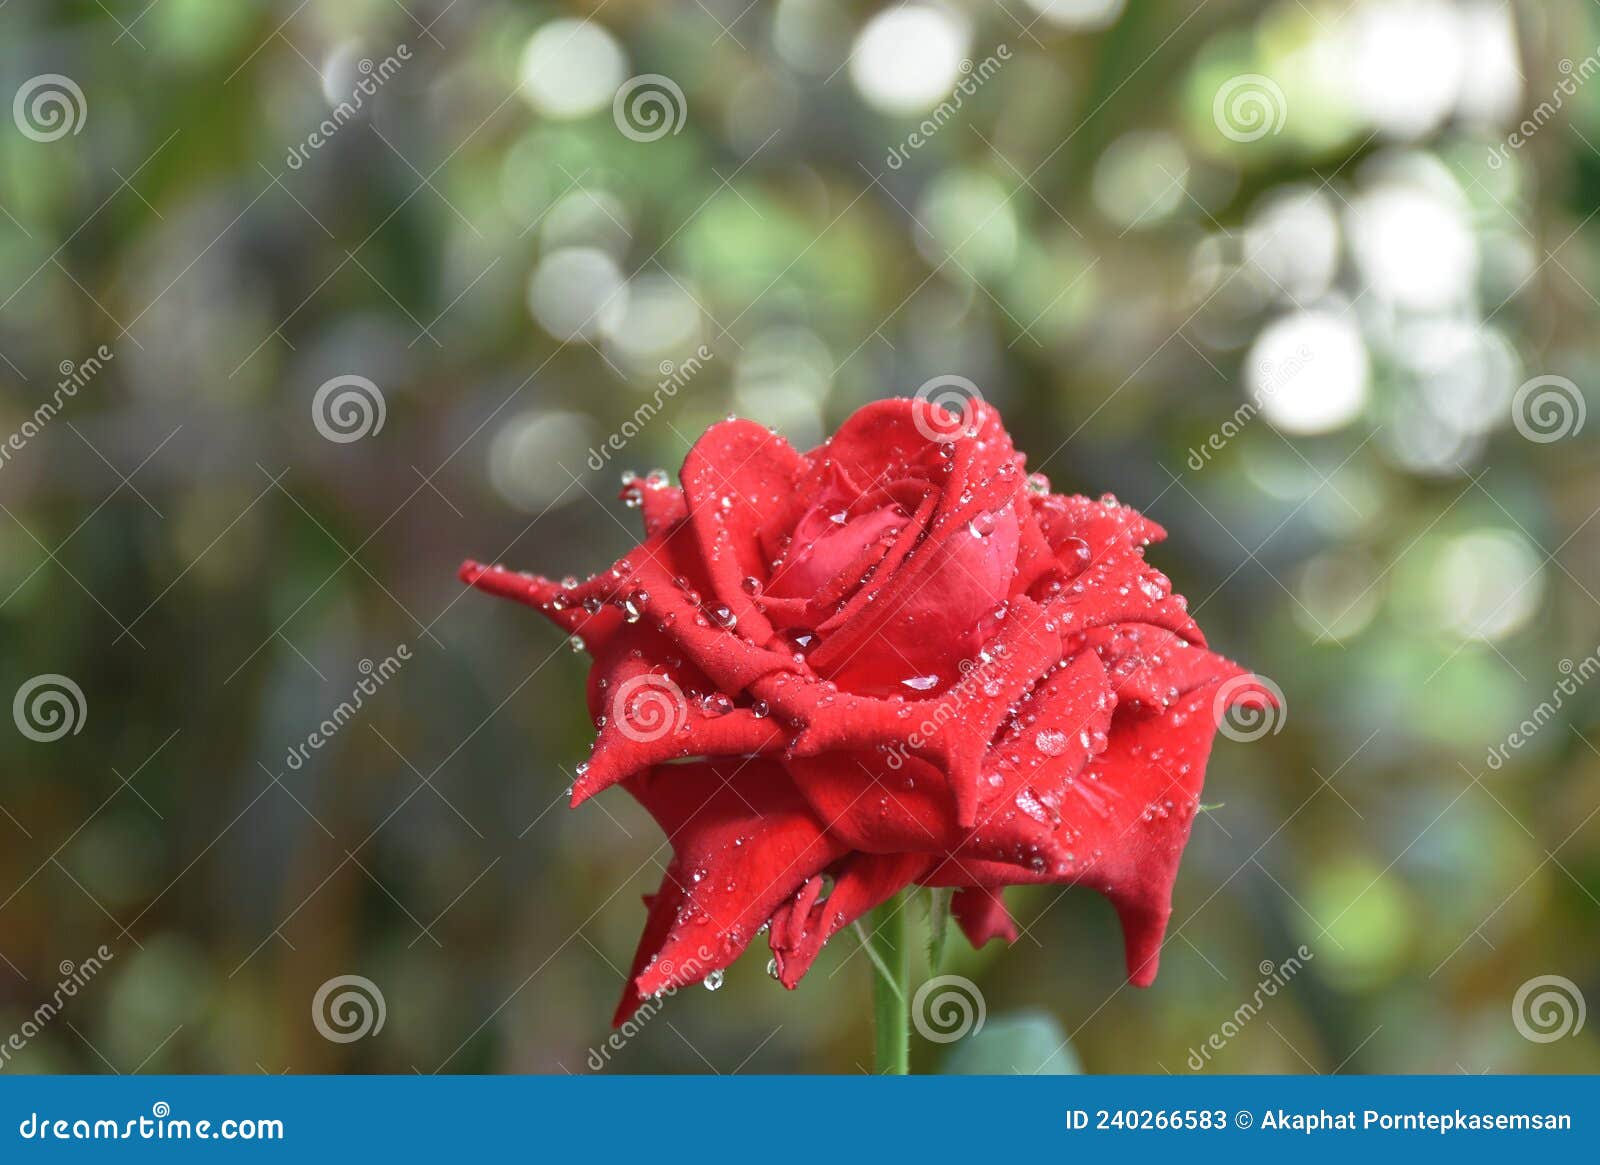 Black Magic Rose Blooming with Drop of Water on Garden Stock Image ...